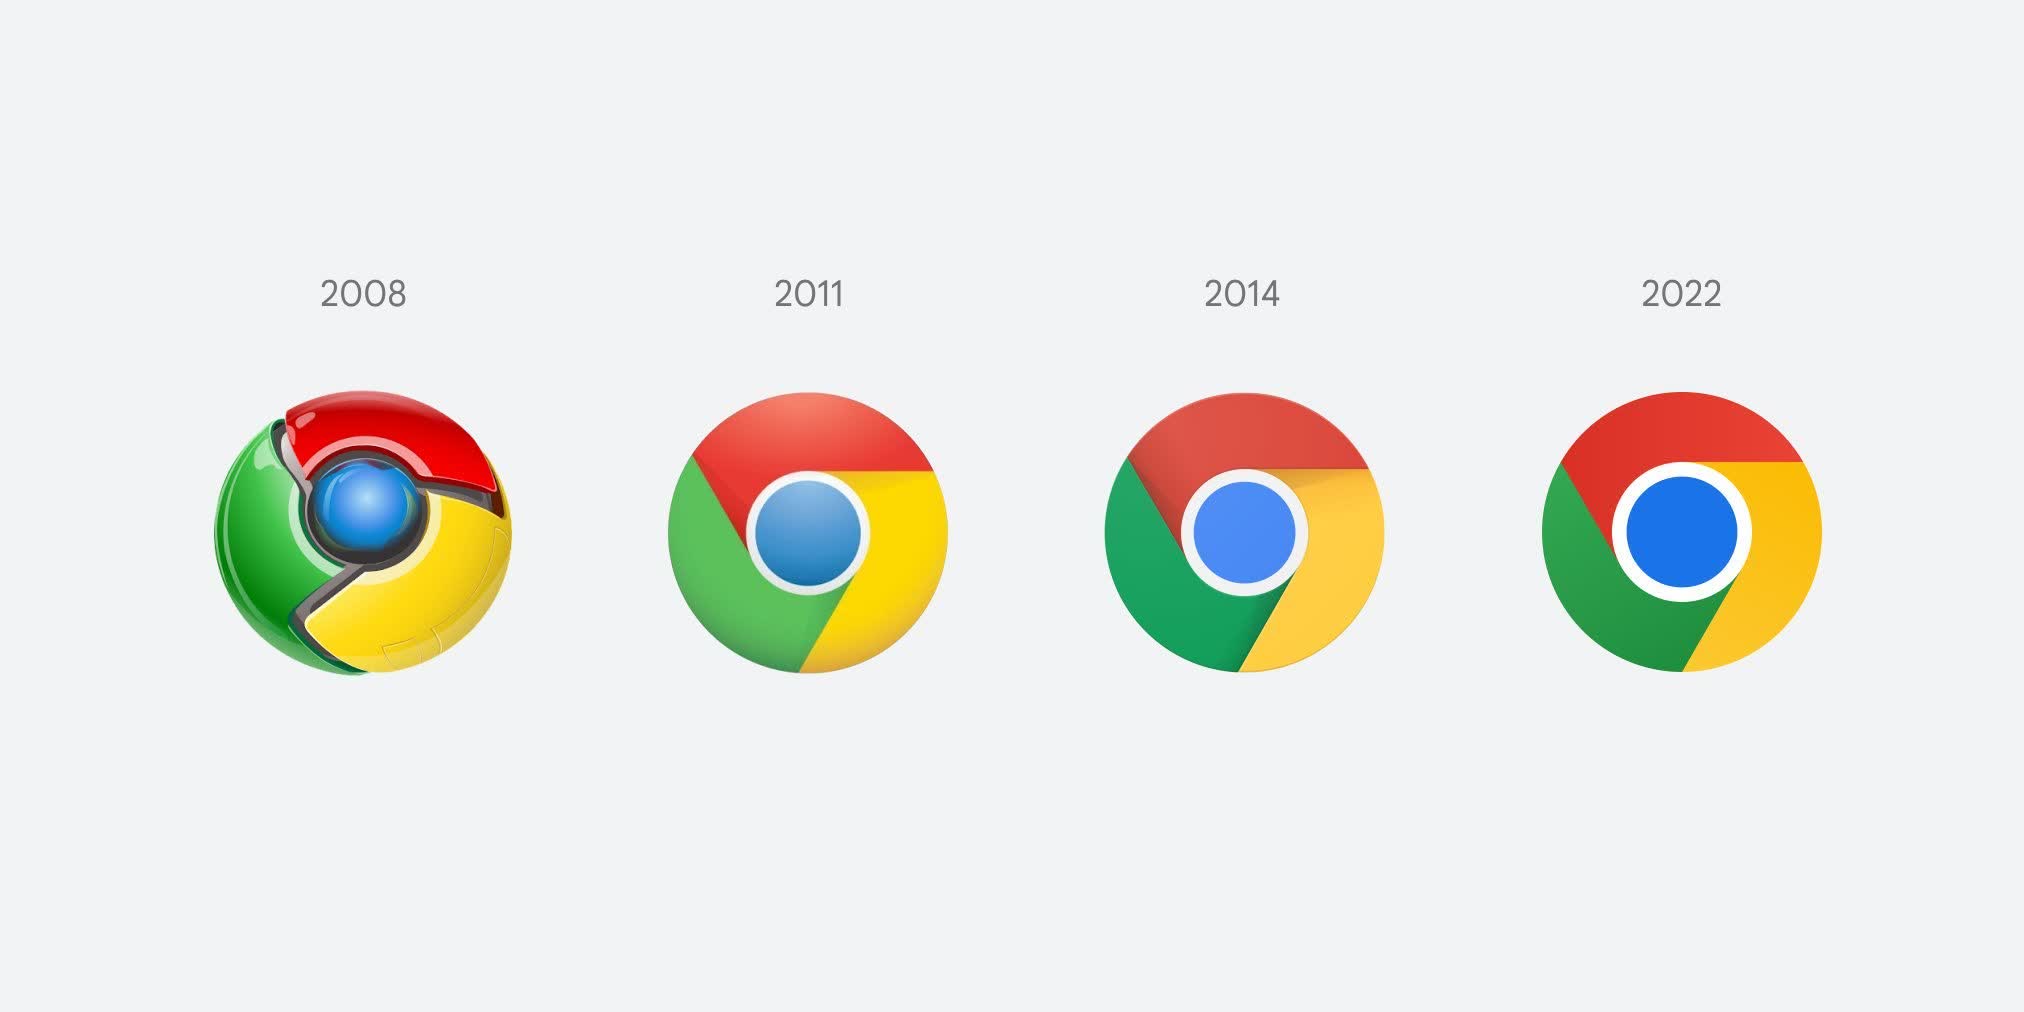 Google Chrome browser logo gets revamped, but can you spot the difference?